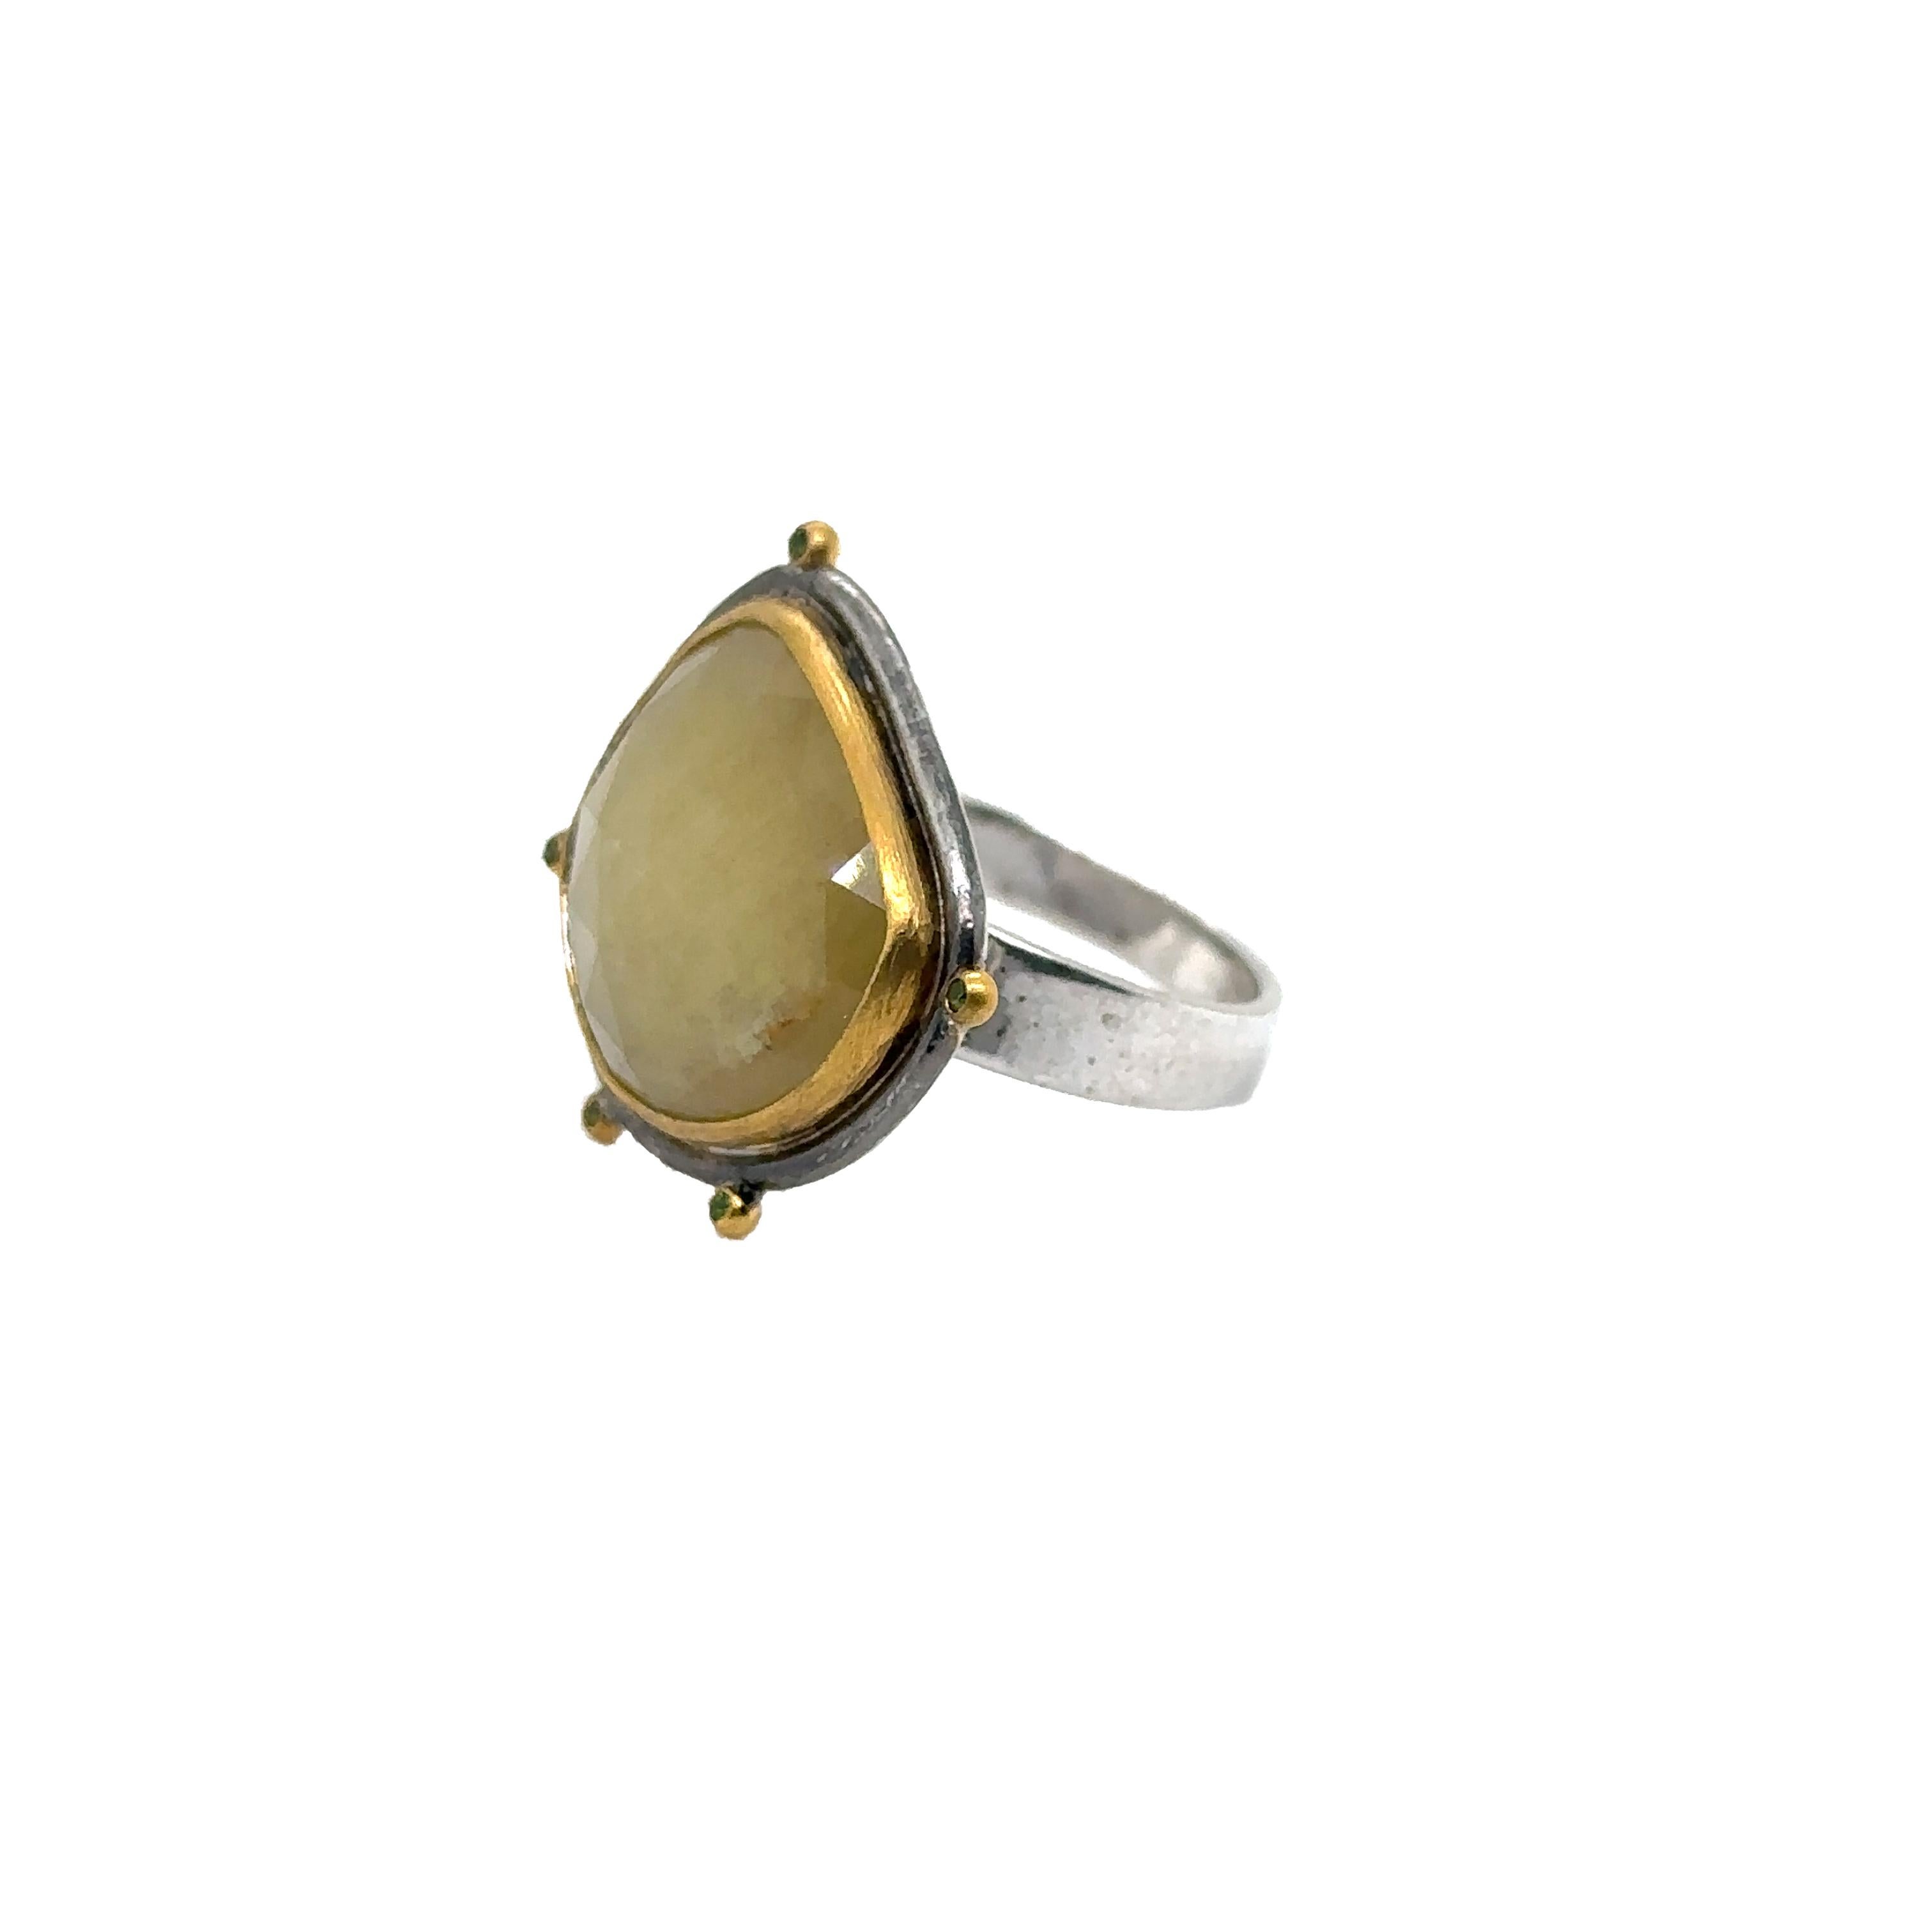 JAS-19-1835 - 24K/SS HANDMADE RING w CHROME DIOPSIDES & NATURAL YELLOW SAPPHIRE For Sale 5